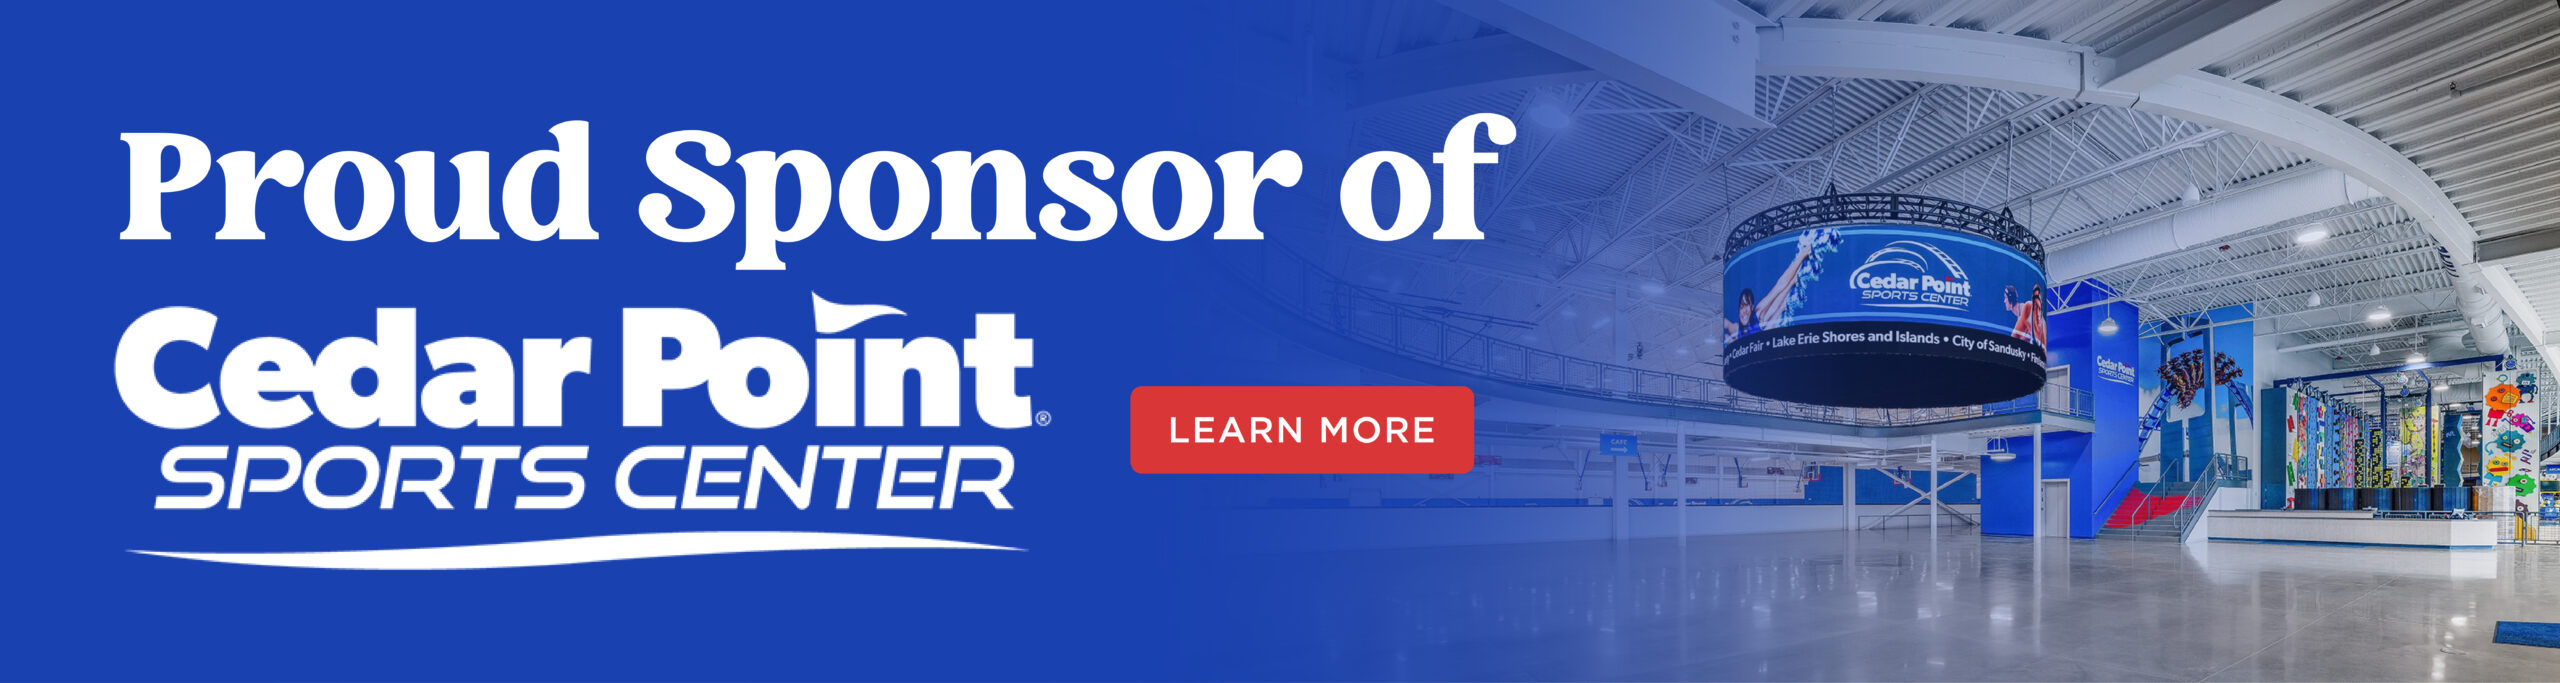 Proud Sponsor of Cedar Point Sports Center. Click to Learn More.